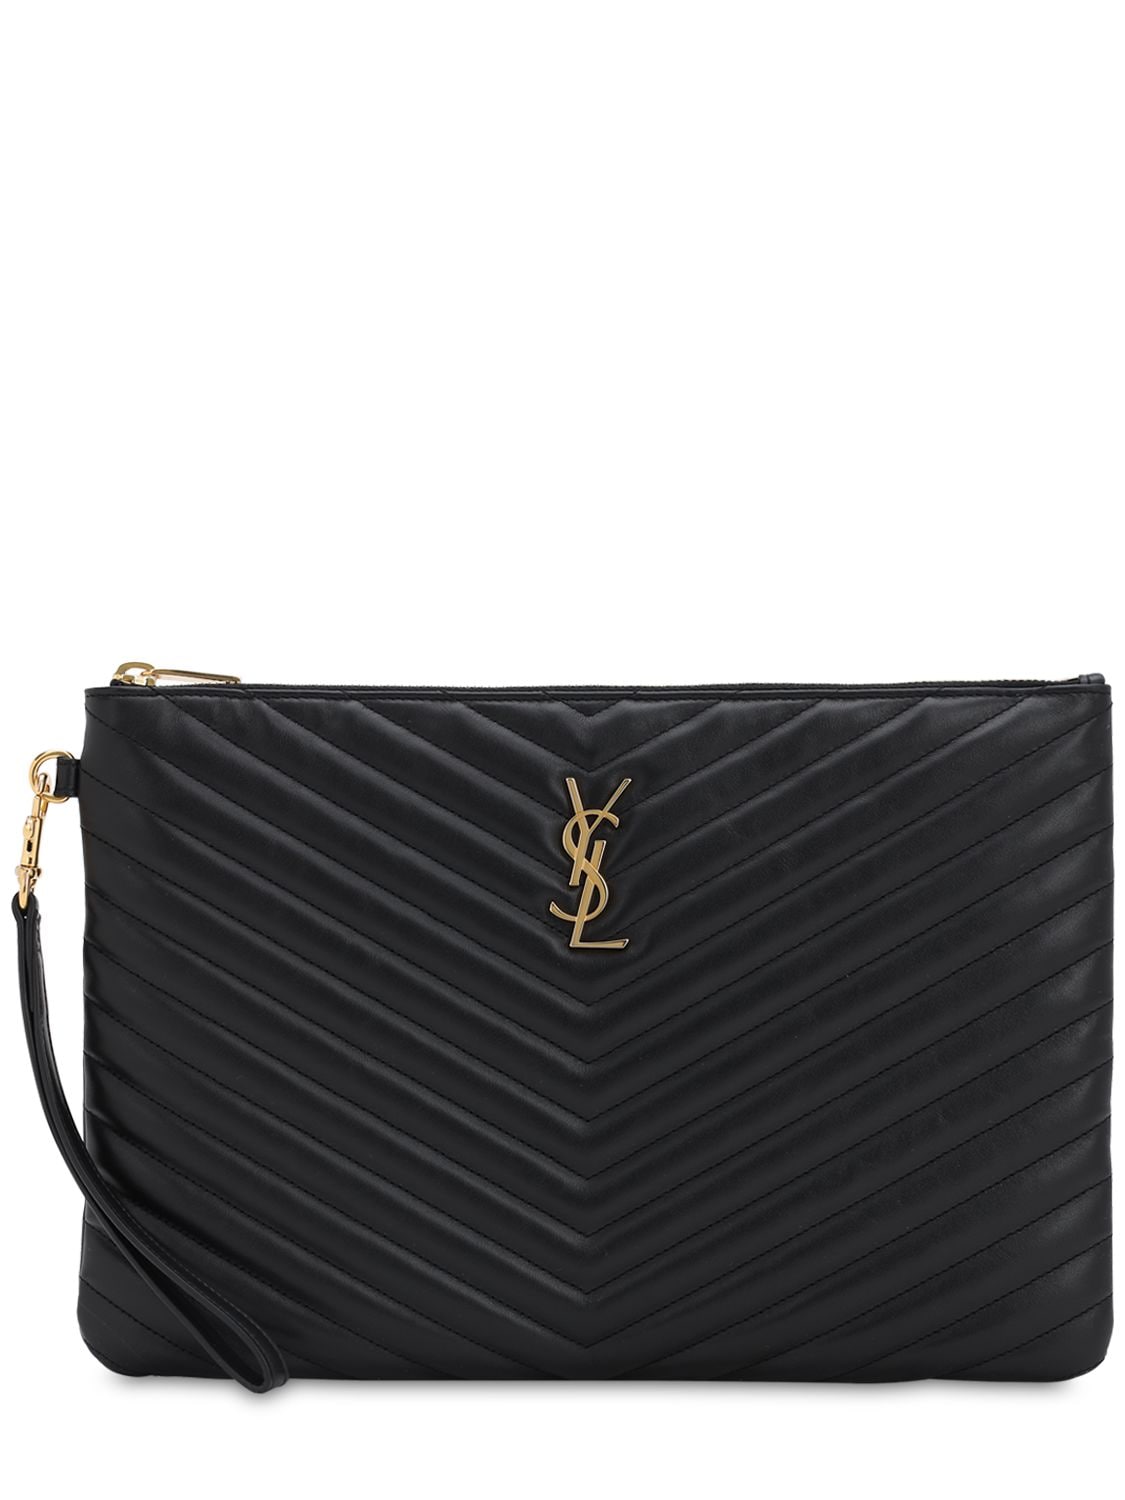 SAINT LAURENT MD QUILTED LEATHER POUCH,72IG1N049-MTAWMA2